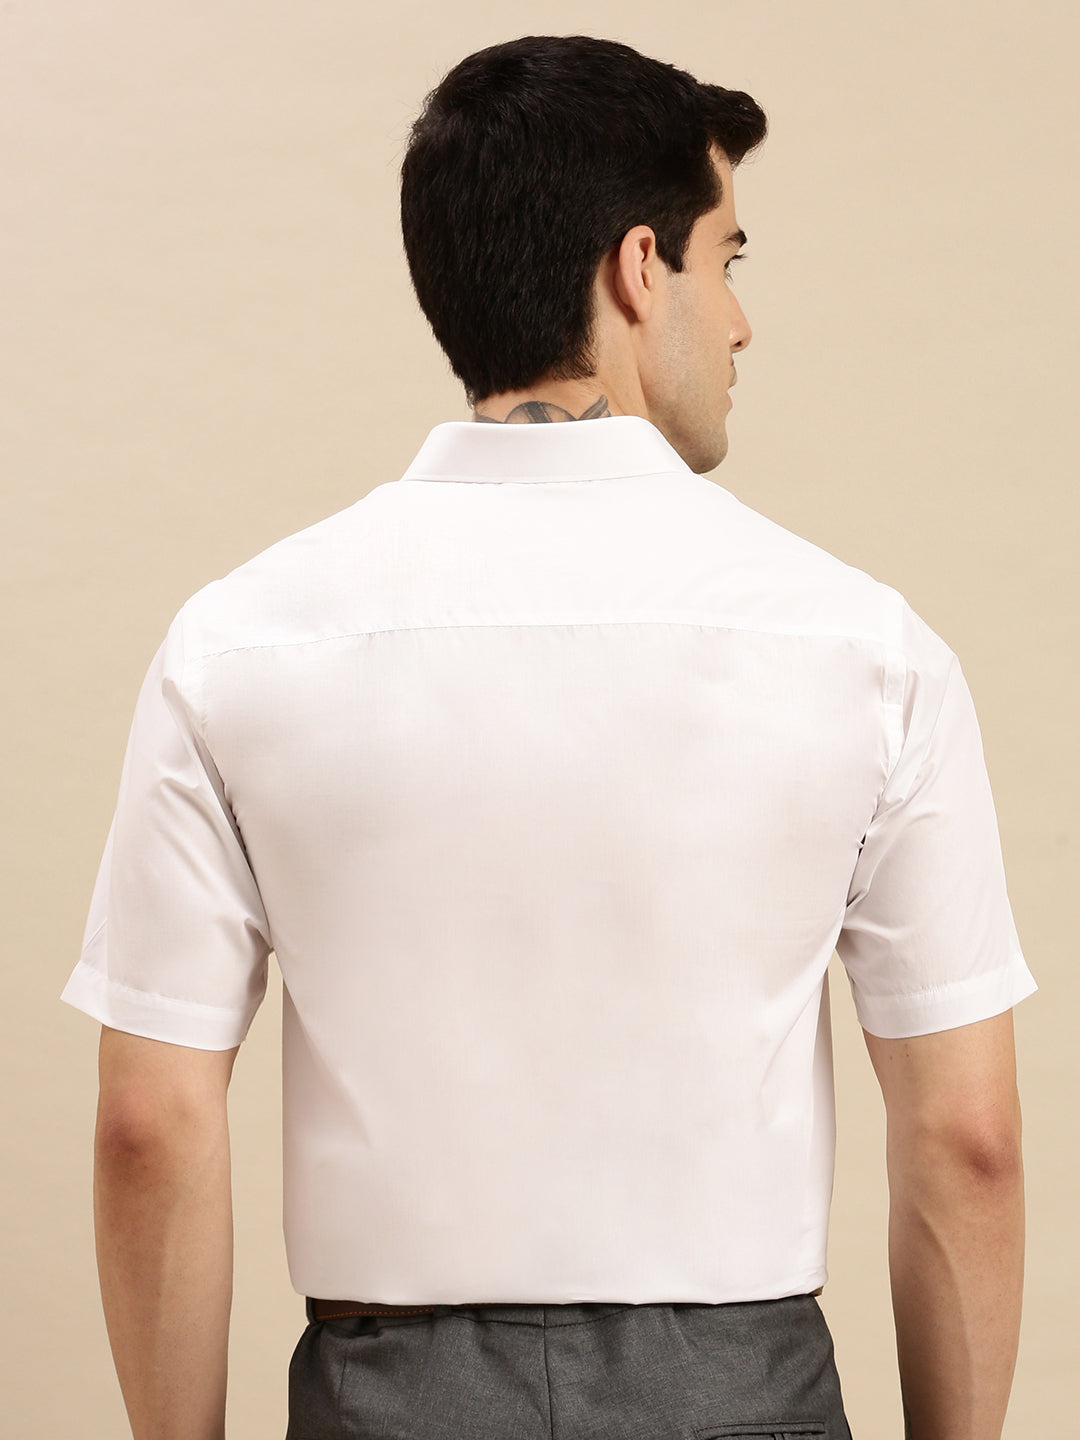 Mens Smart Fit 100% Cotton White Shirt Half Sleeves Cotton Touch -Back view